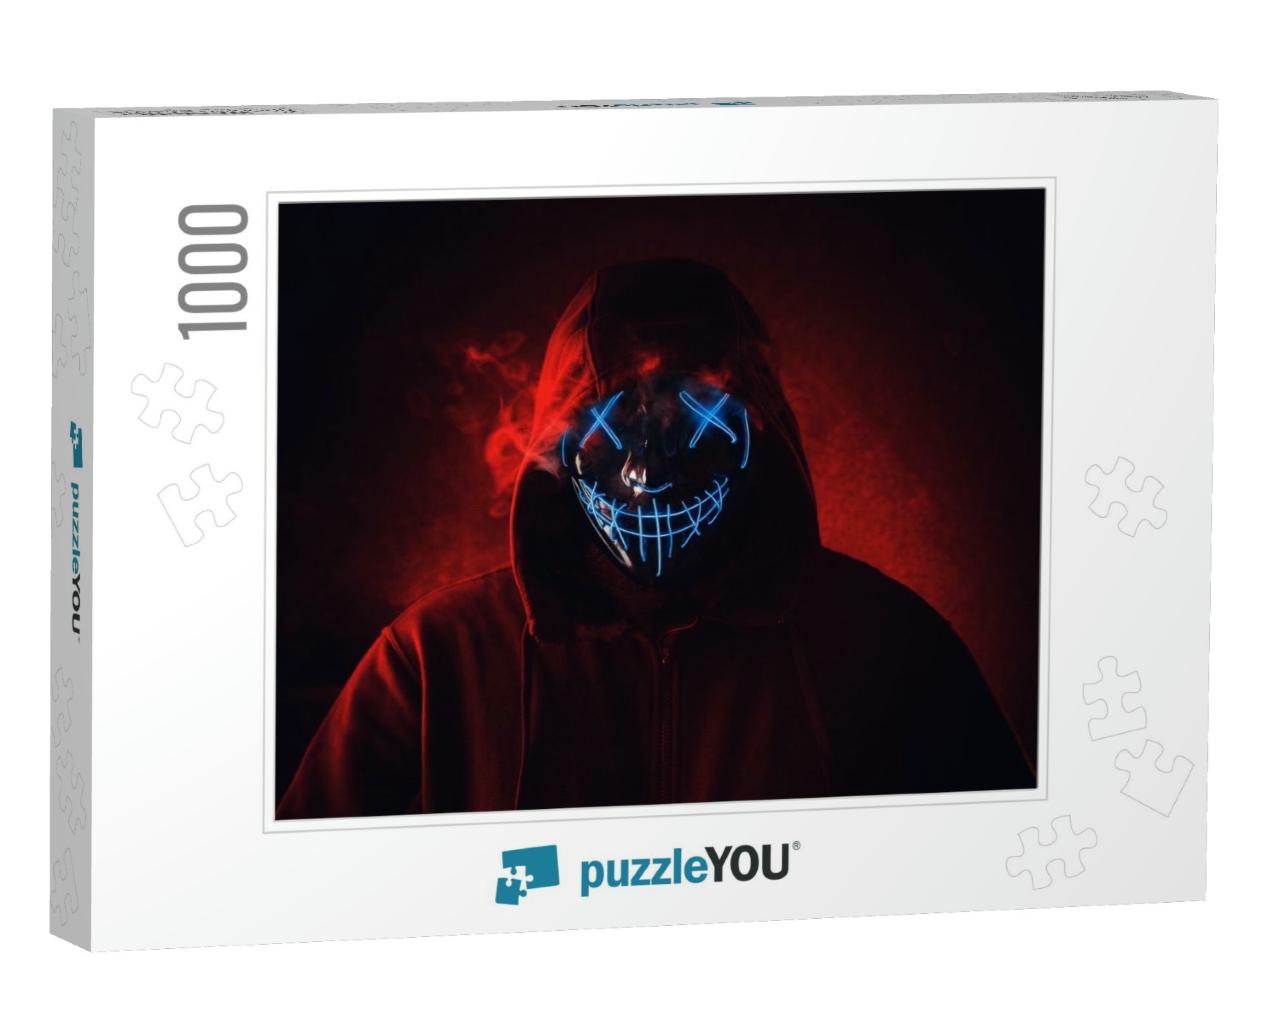 Man in Angry & Scary Lighting Neon Glow Mask in Hood on D... Jigsaw Puzzle with 1000 pieces